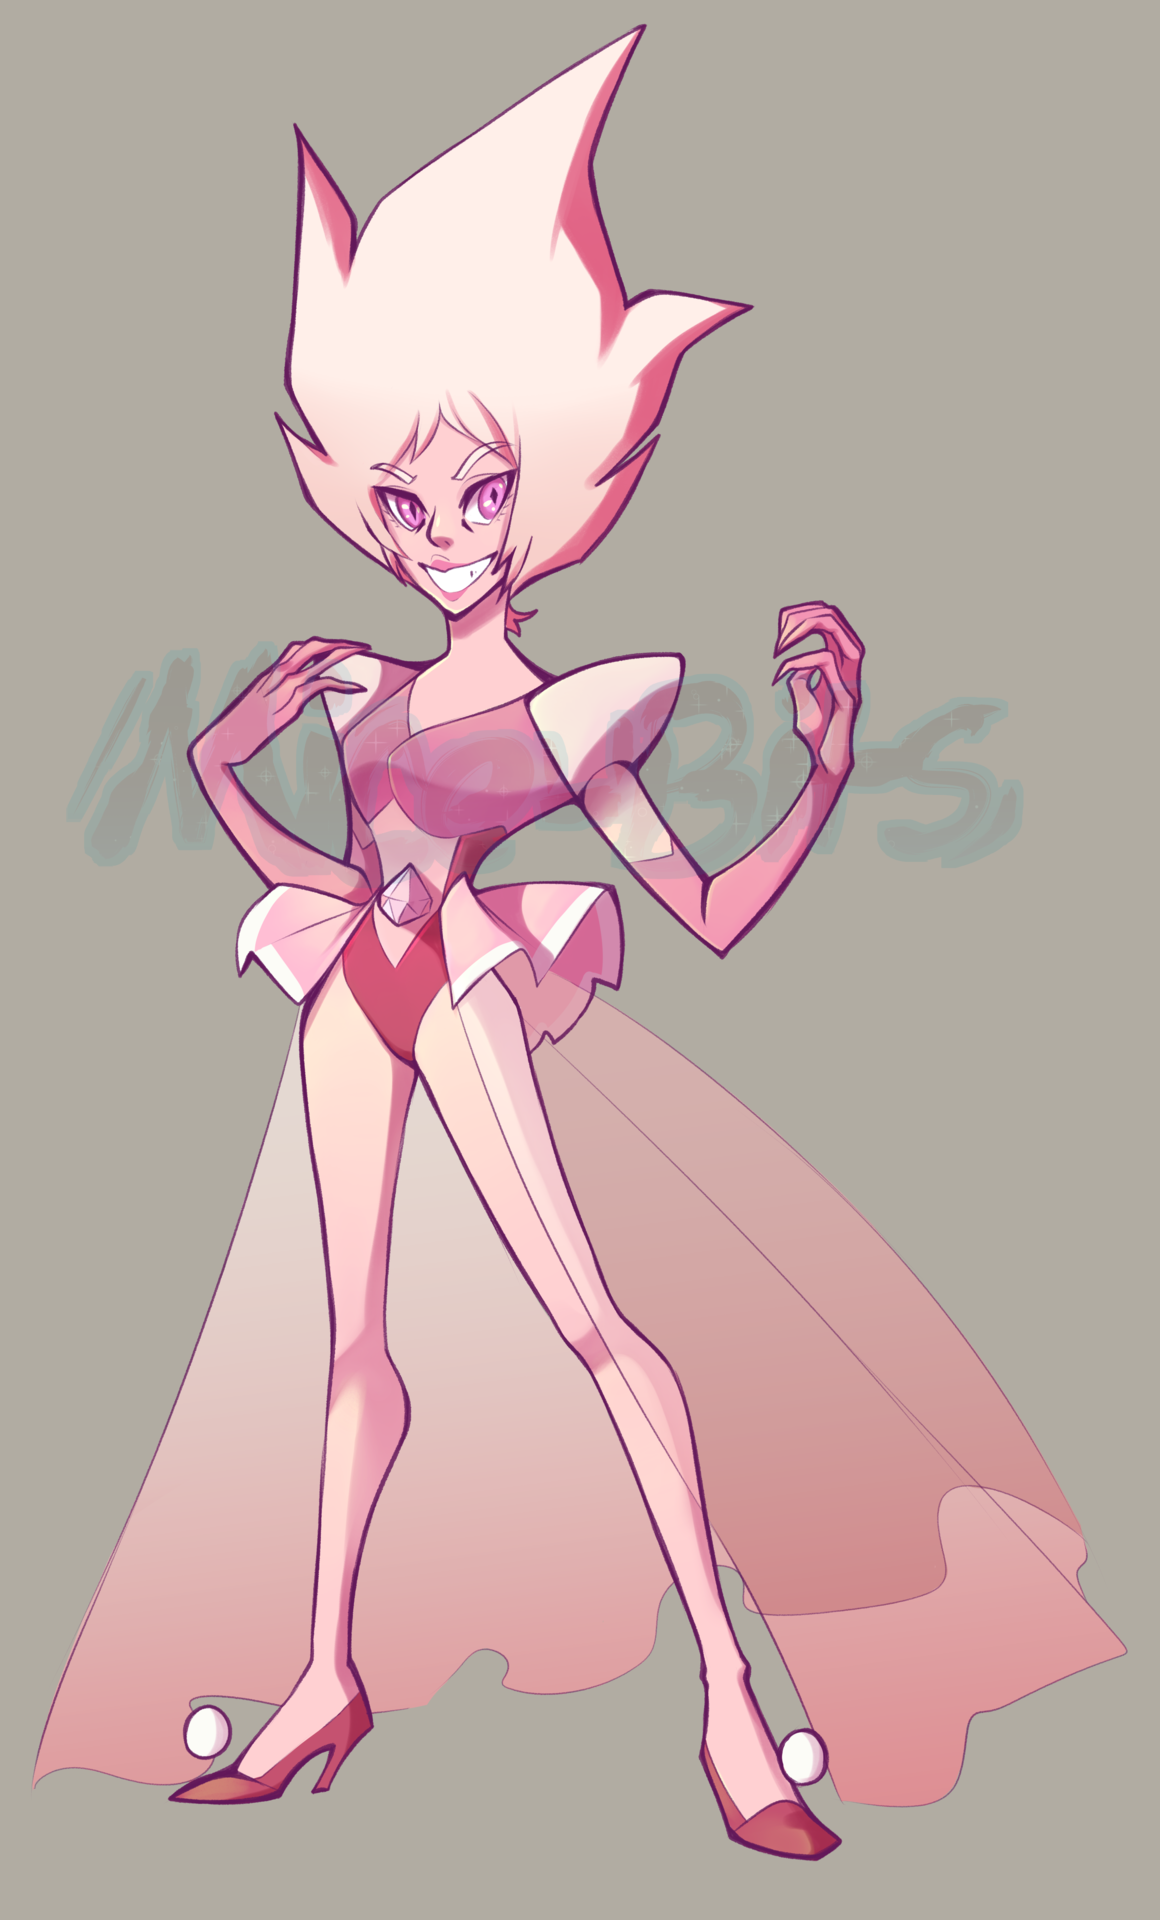 went ahead and combined most of pink diamond’s silhouettes and designs o: